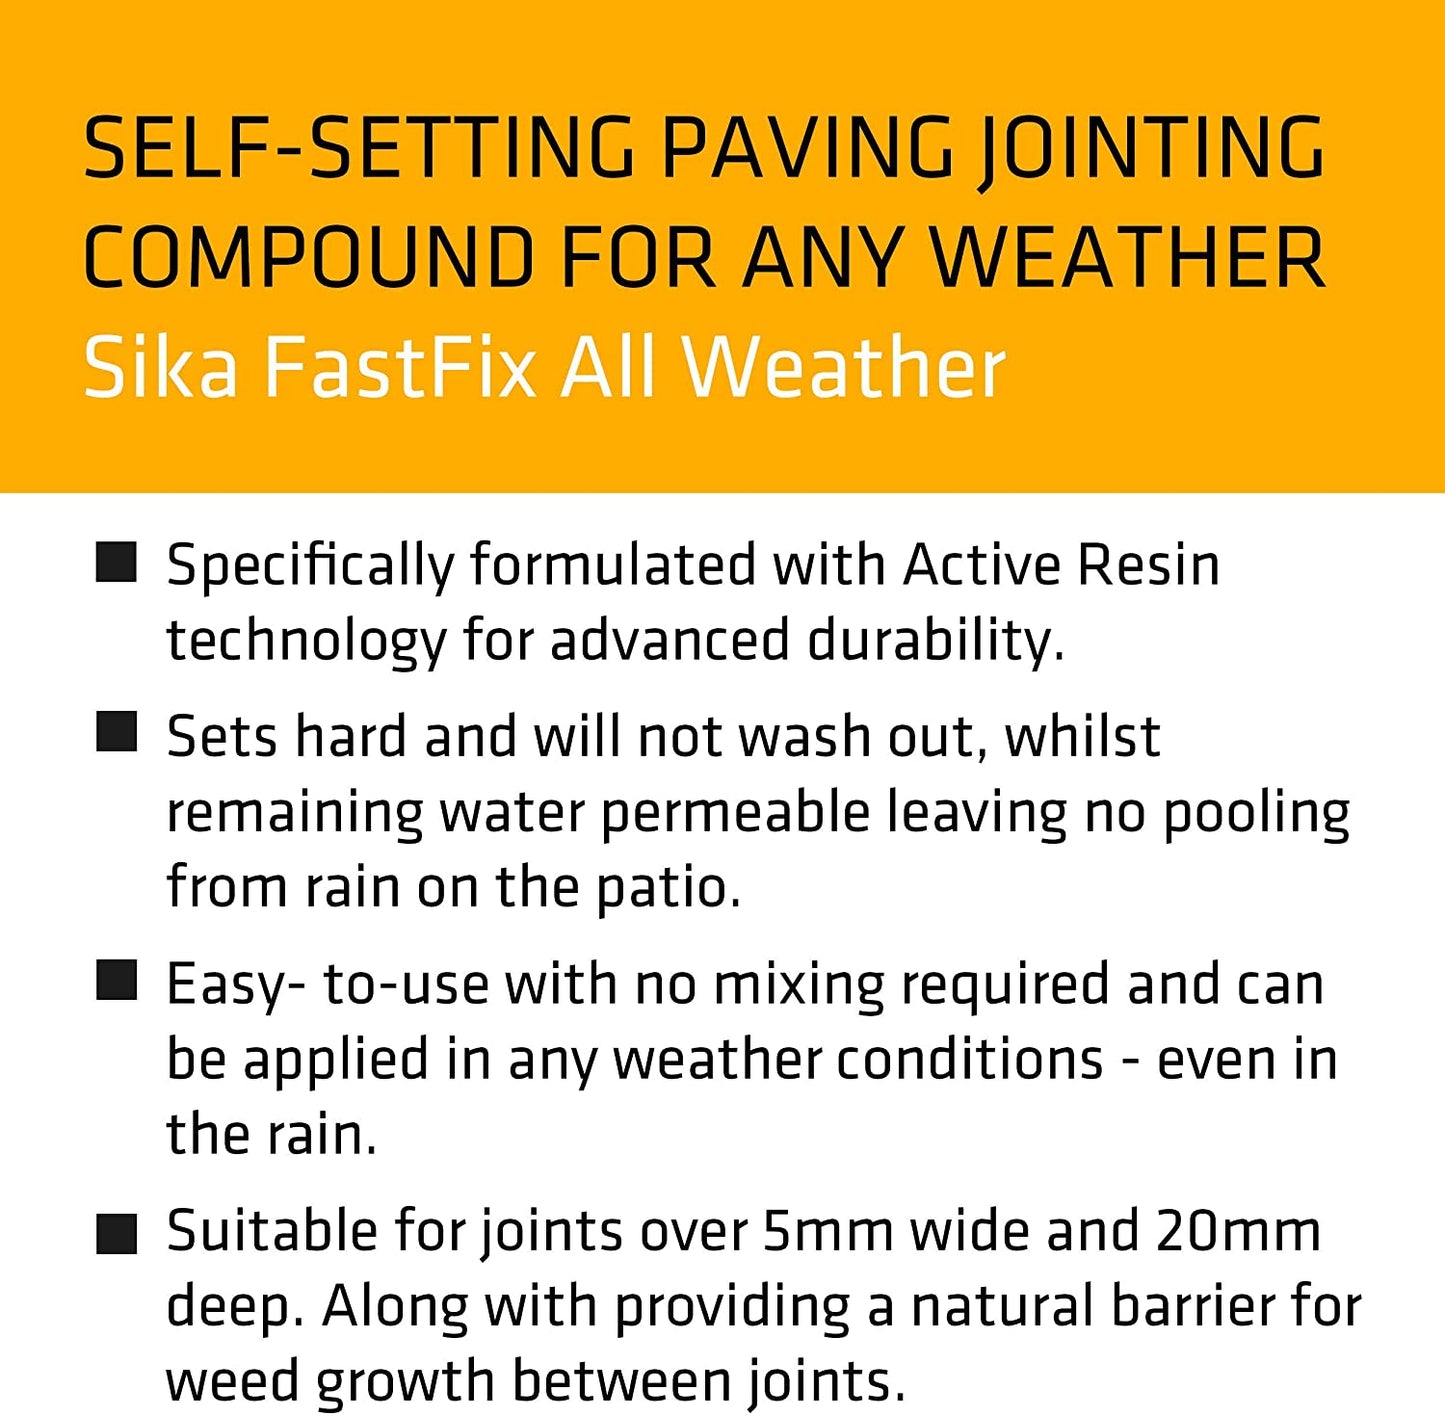 Sika FastFix All Weather Self-Setting Paving Jointing Compound, Charcoal, 15 kg - 17 sq. m